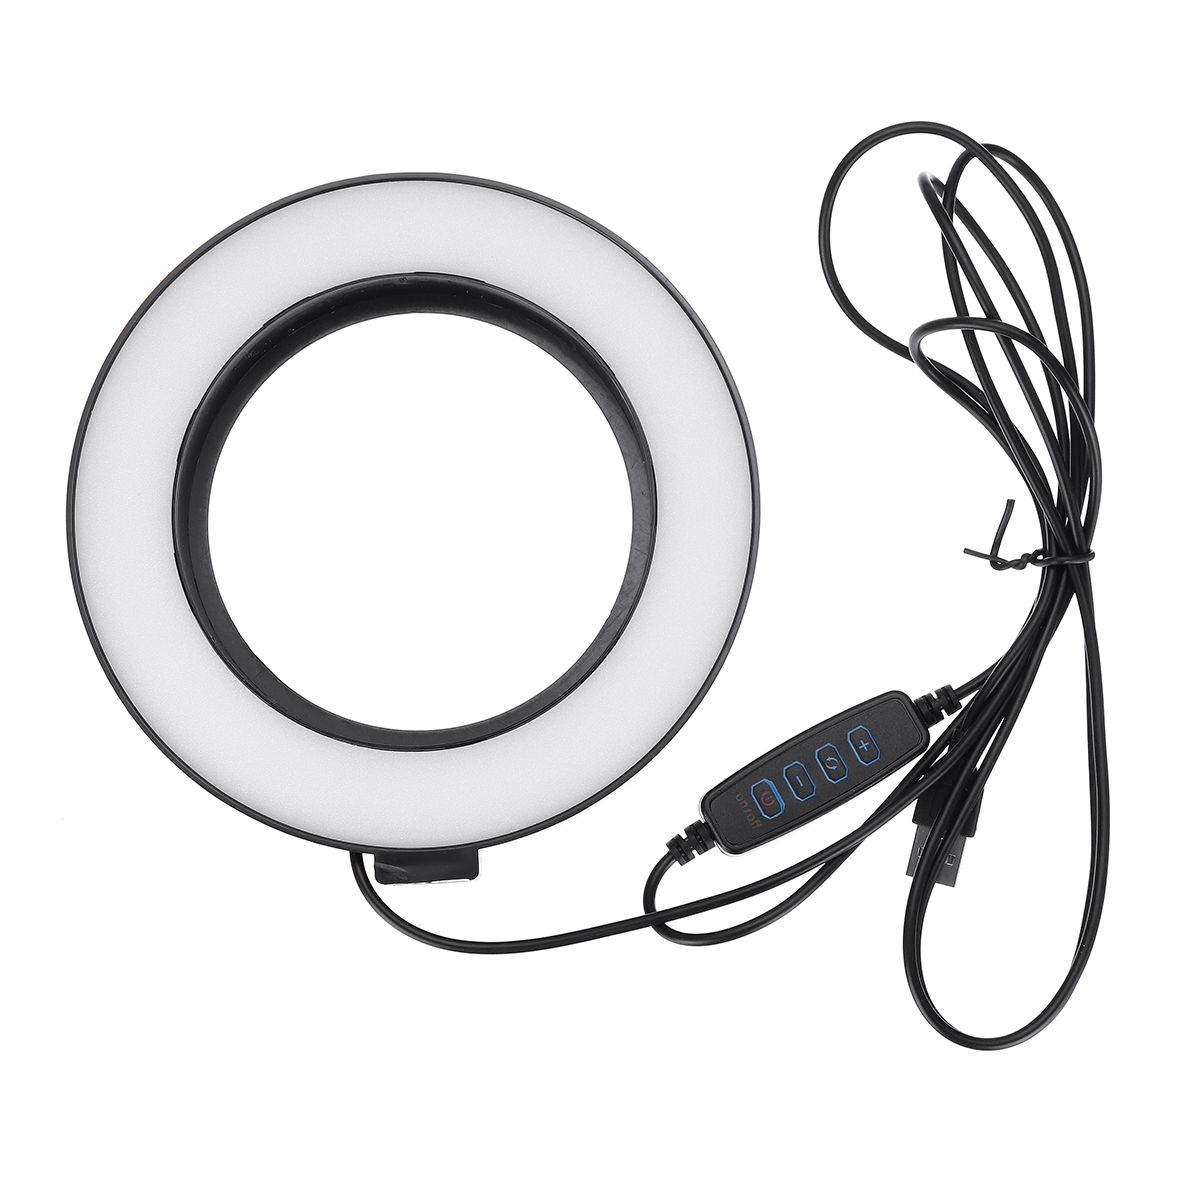 6-Inch-Ring-LED-Live-Light-Photographic-Lamp-with-Bracket-1655933